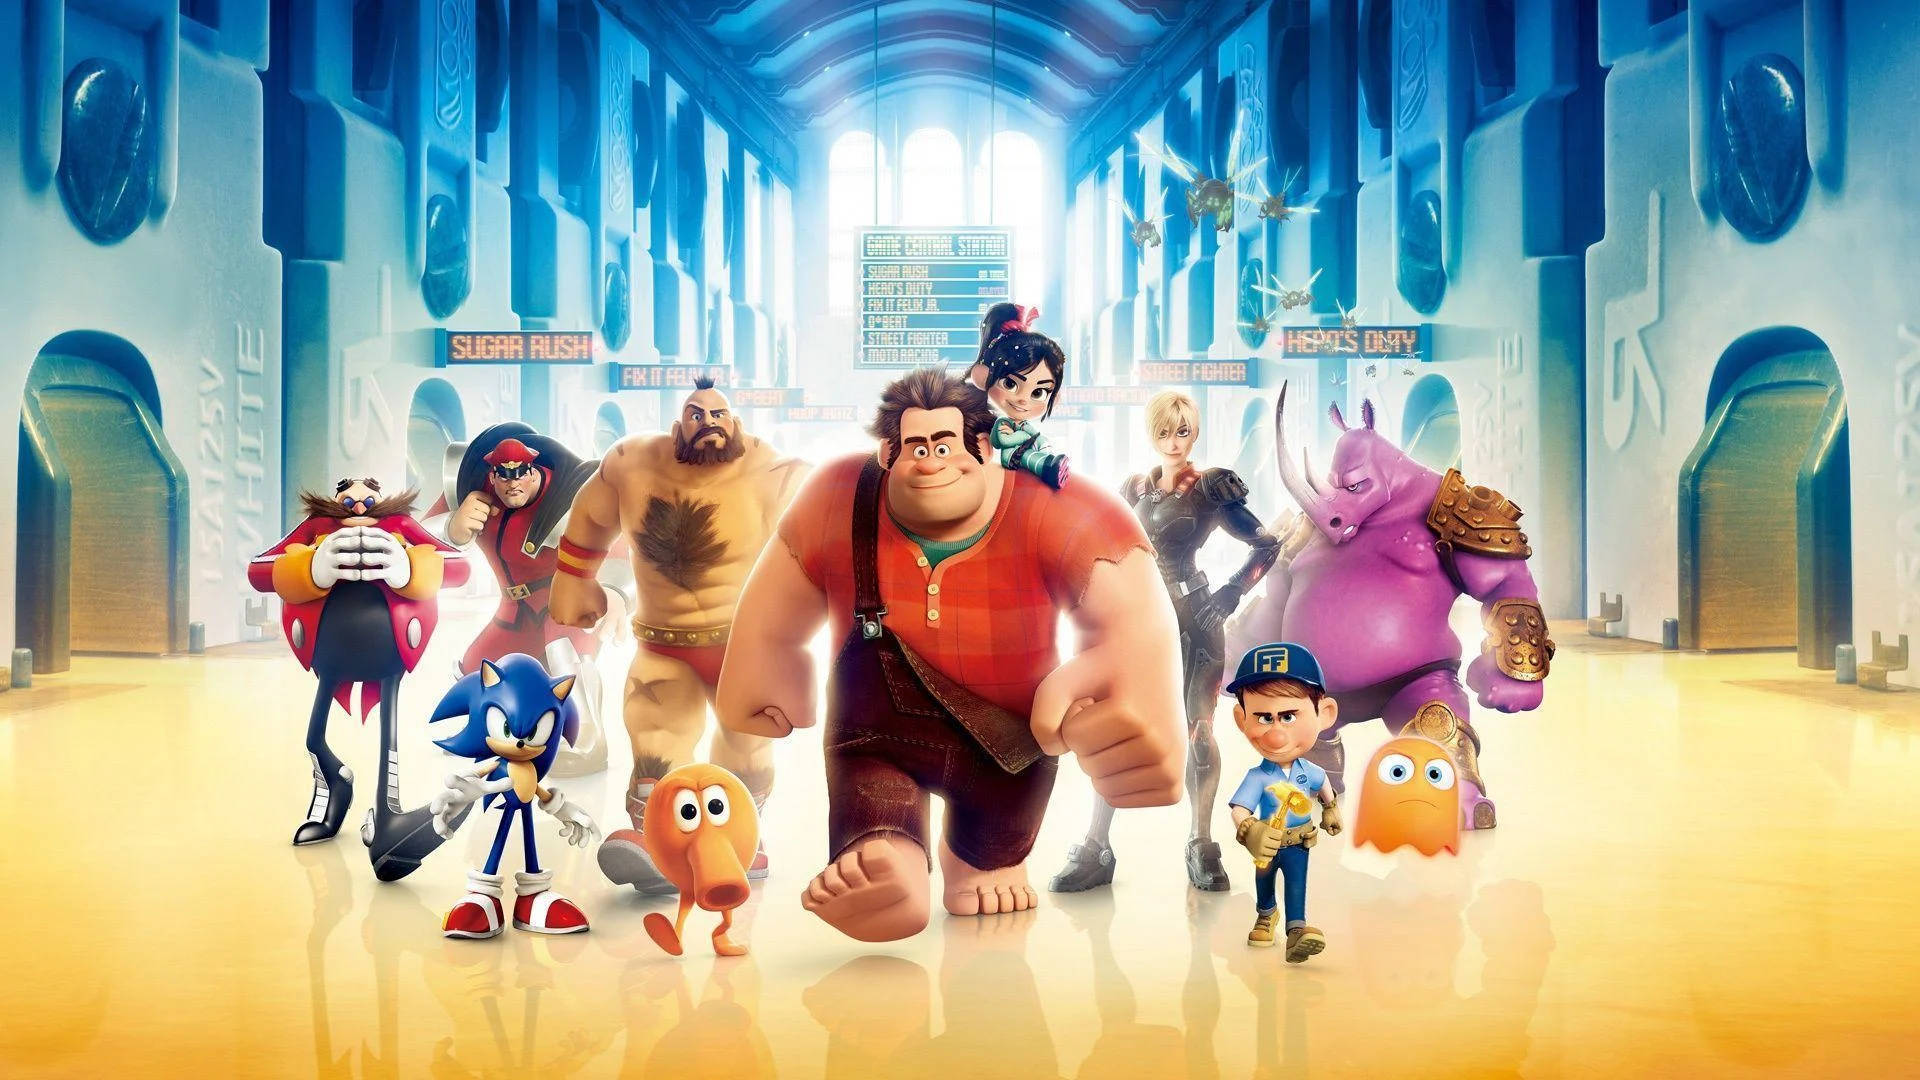 Wreck-it Ralph Game Central Station Background